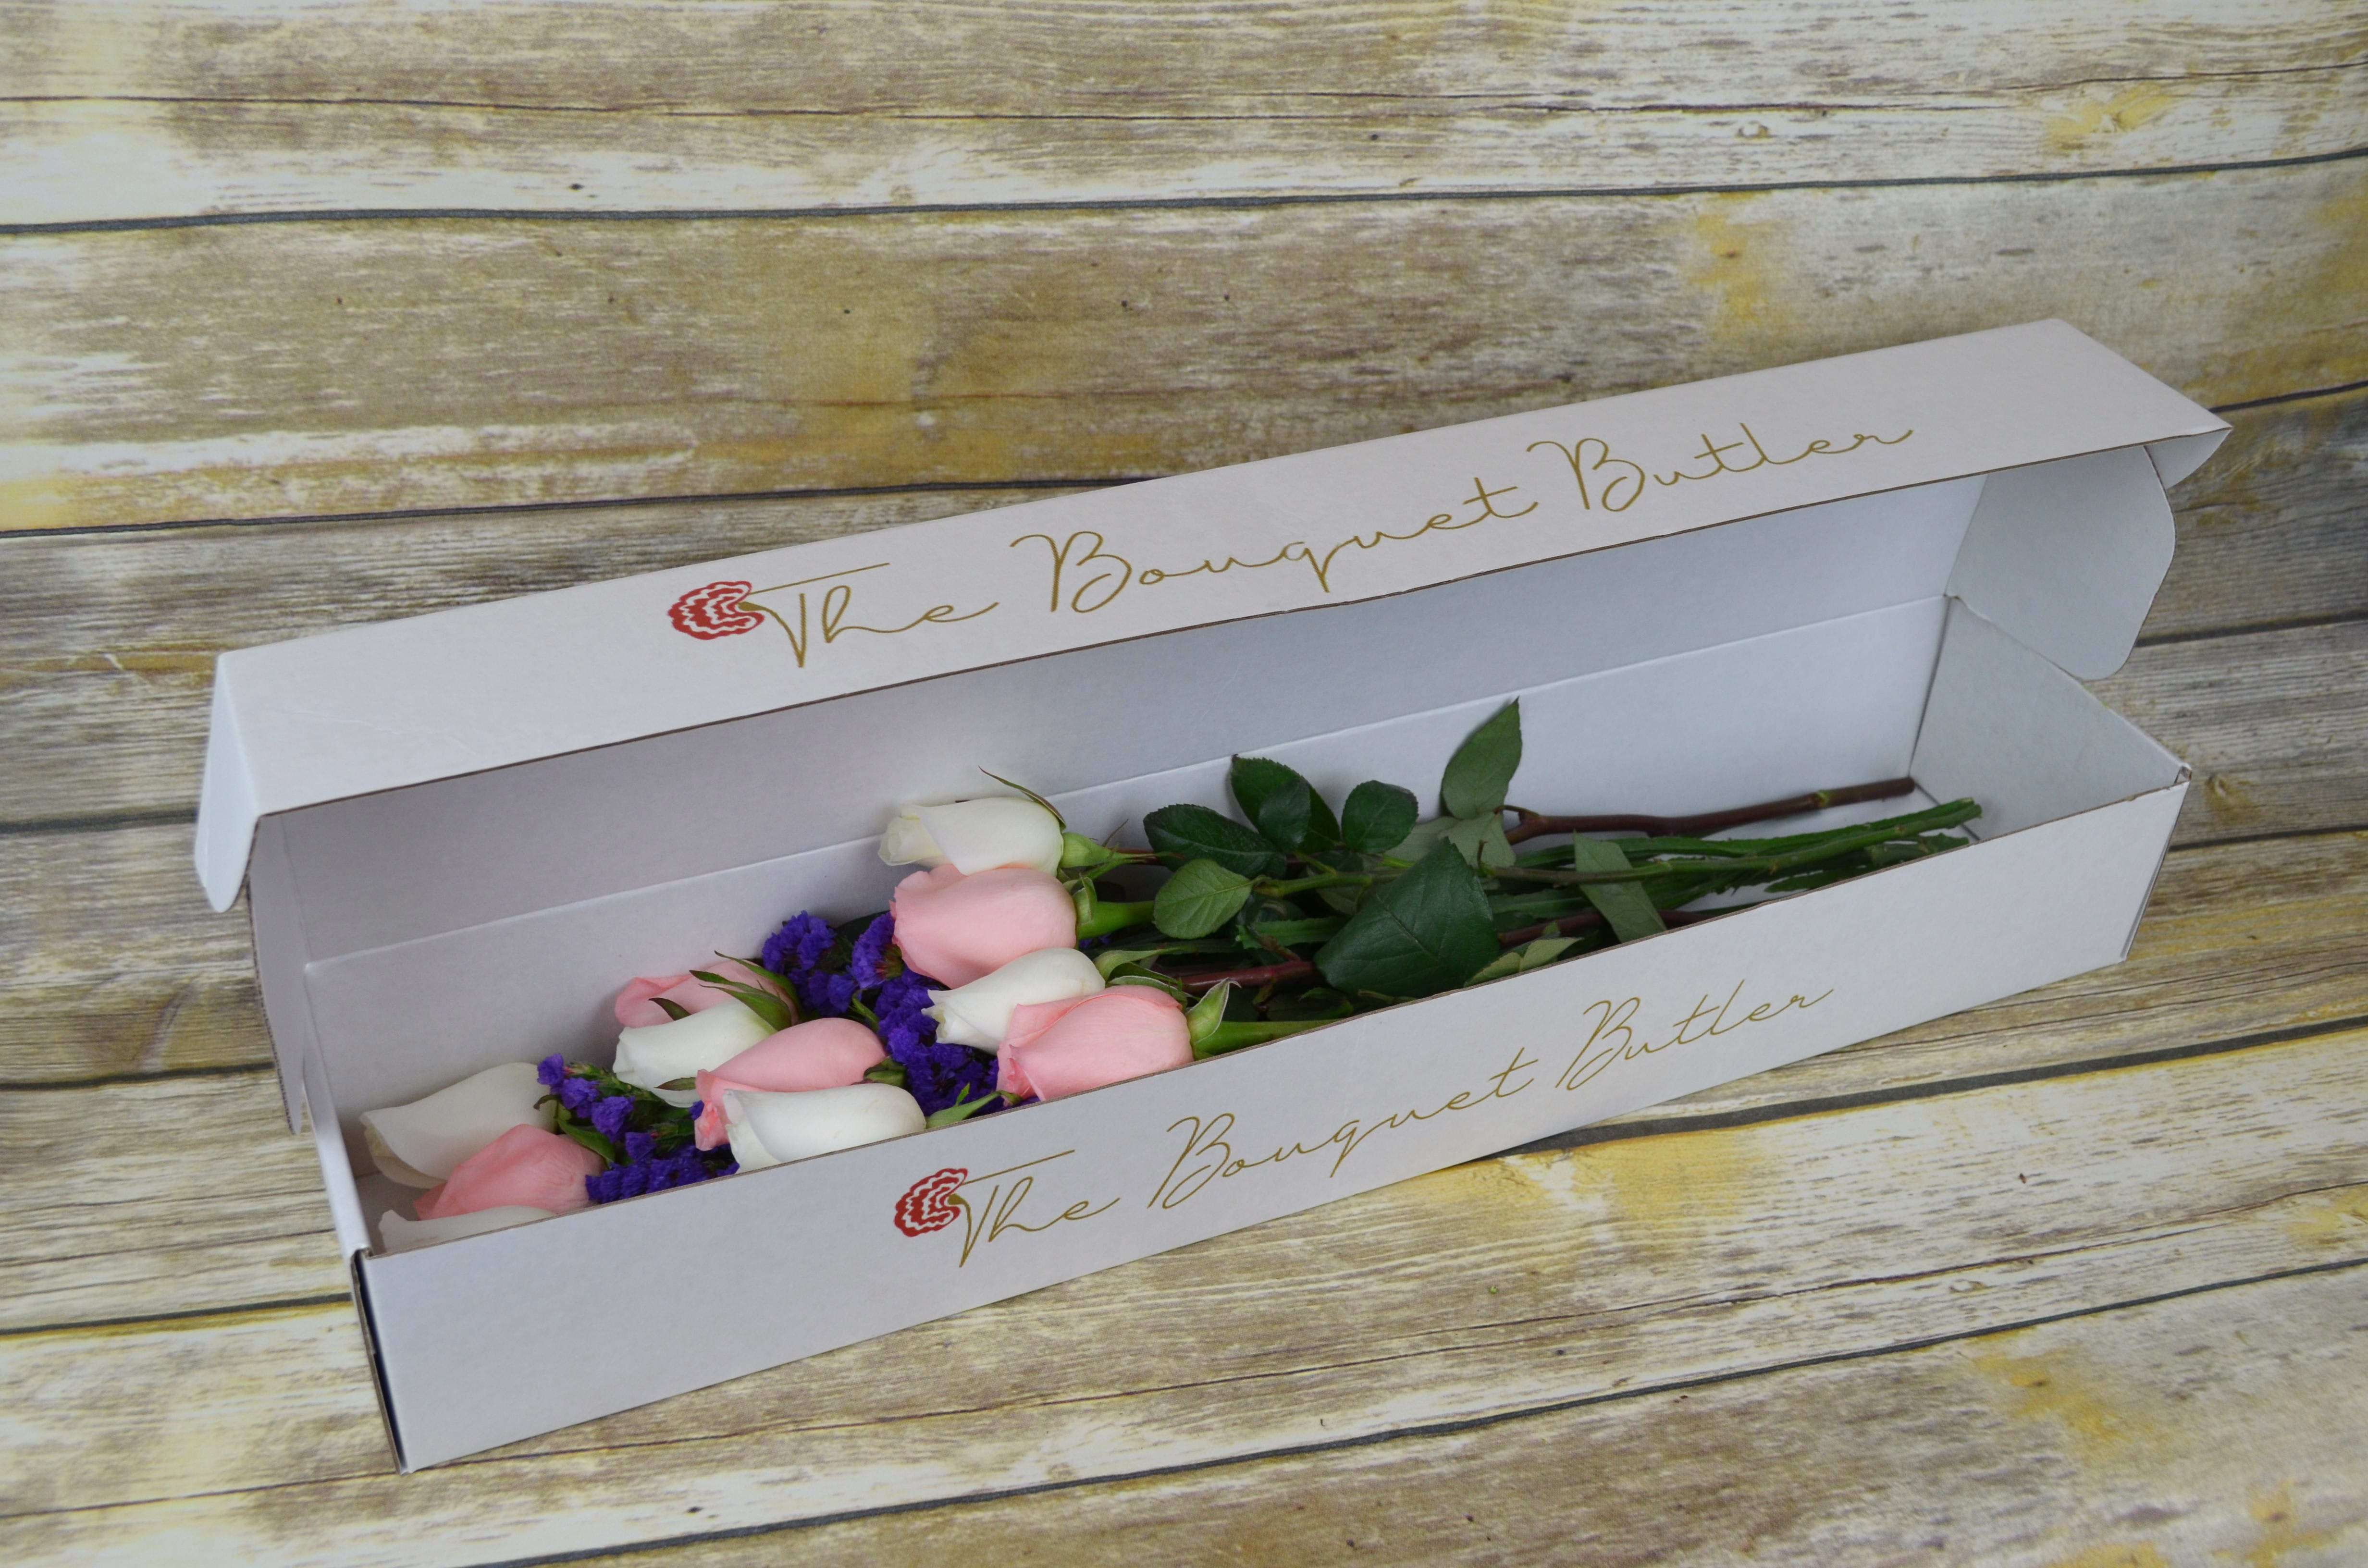 So Sweet - Boxed - The perfect collaboration of pink and white, just right for any occasion. All bouquets are arranged by our professional floral design team accented with seasonal filler (i.e. greenery, baby’s breath, etc.) inside a gift box. Blooms are hand delivered in person to enhance any celebration or a “just because” surprise. Our team selects the freshest flowers available, so shade of rose may vary due to seasonal availability.